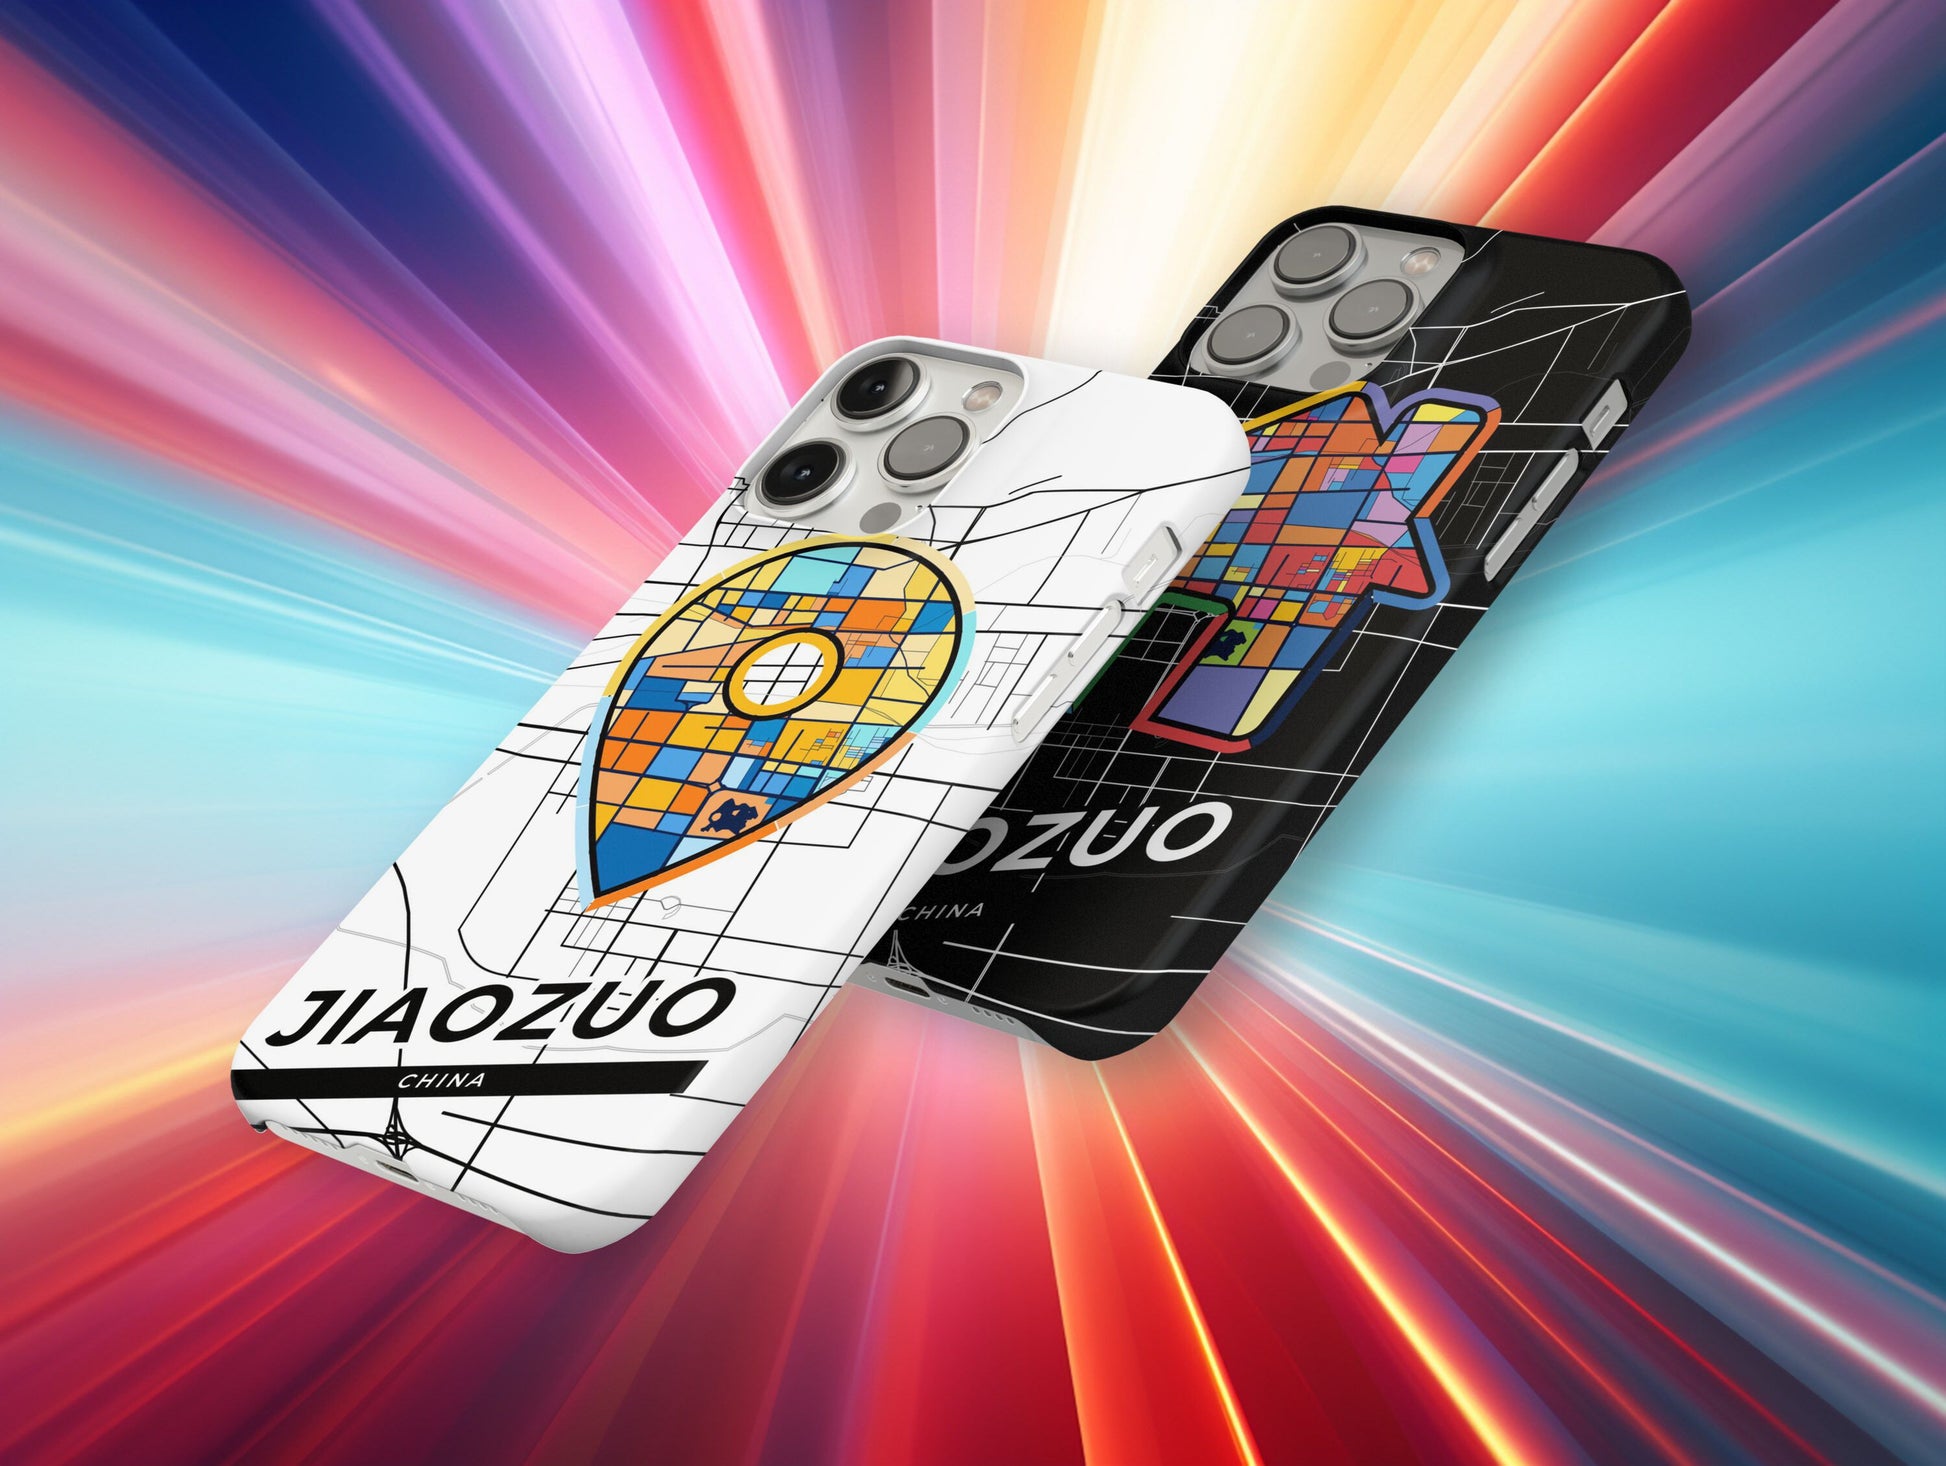 Jiaozuo China slim phone case with colorful icon. Birthday, wedding or housewarming gift. Couple match cases.